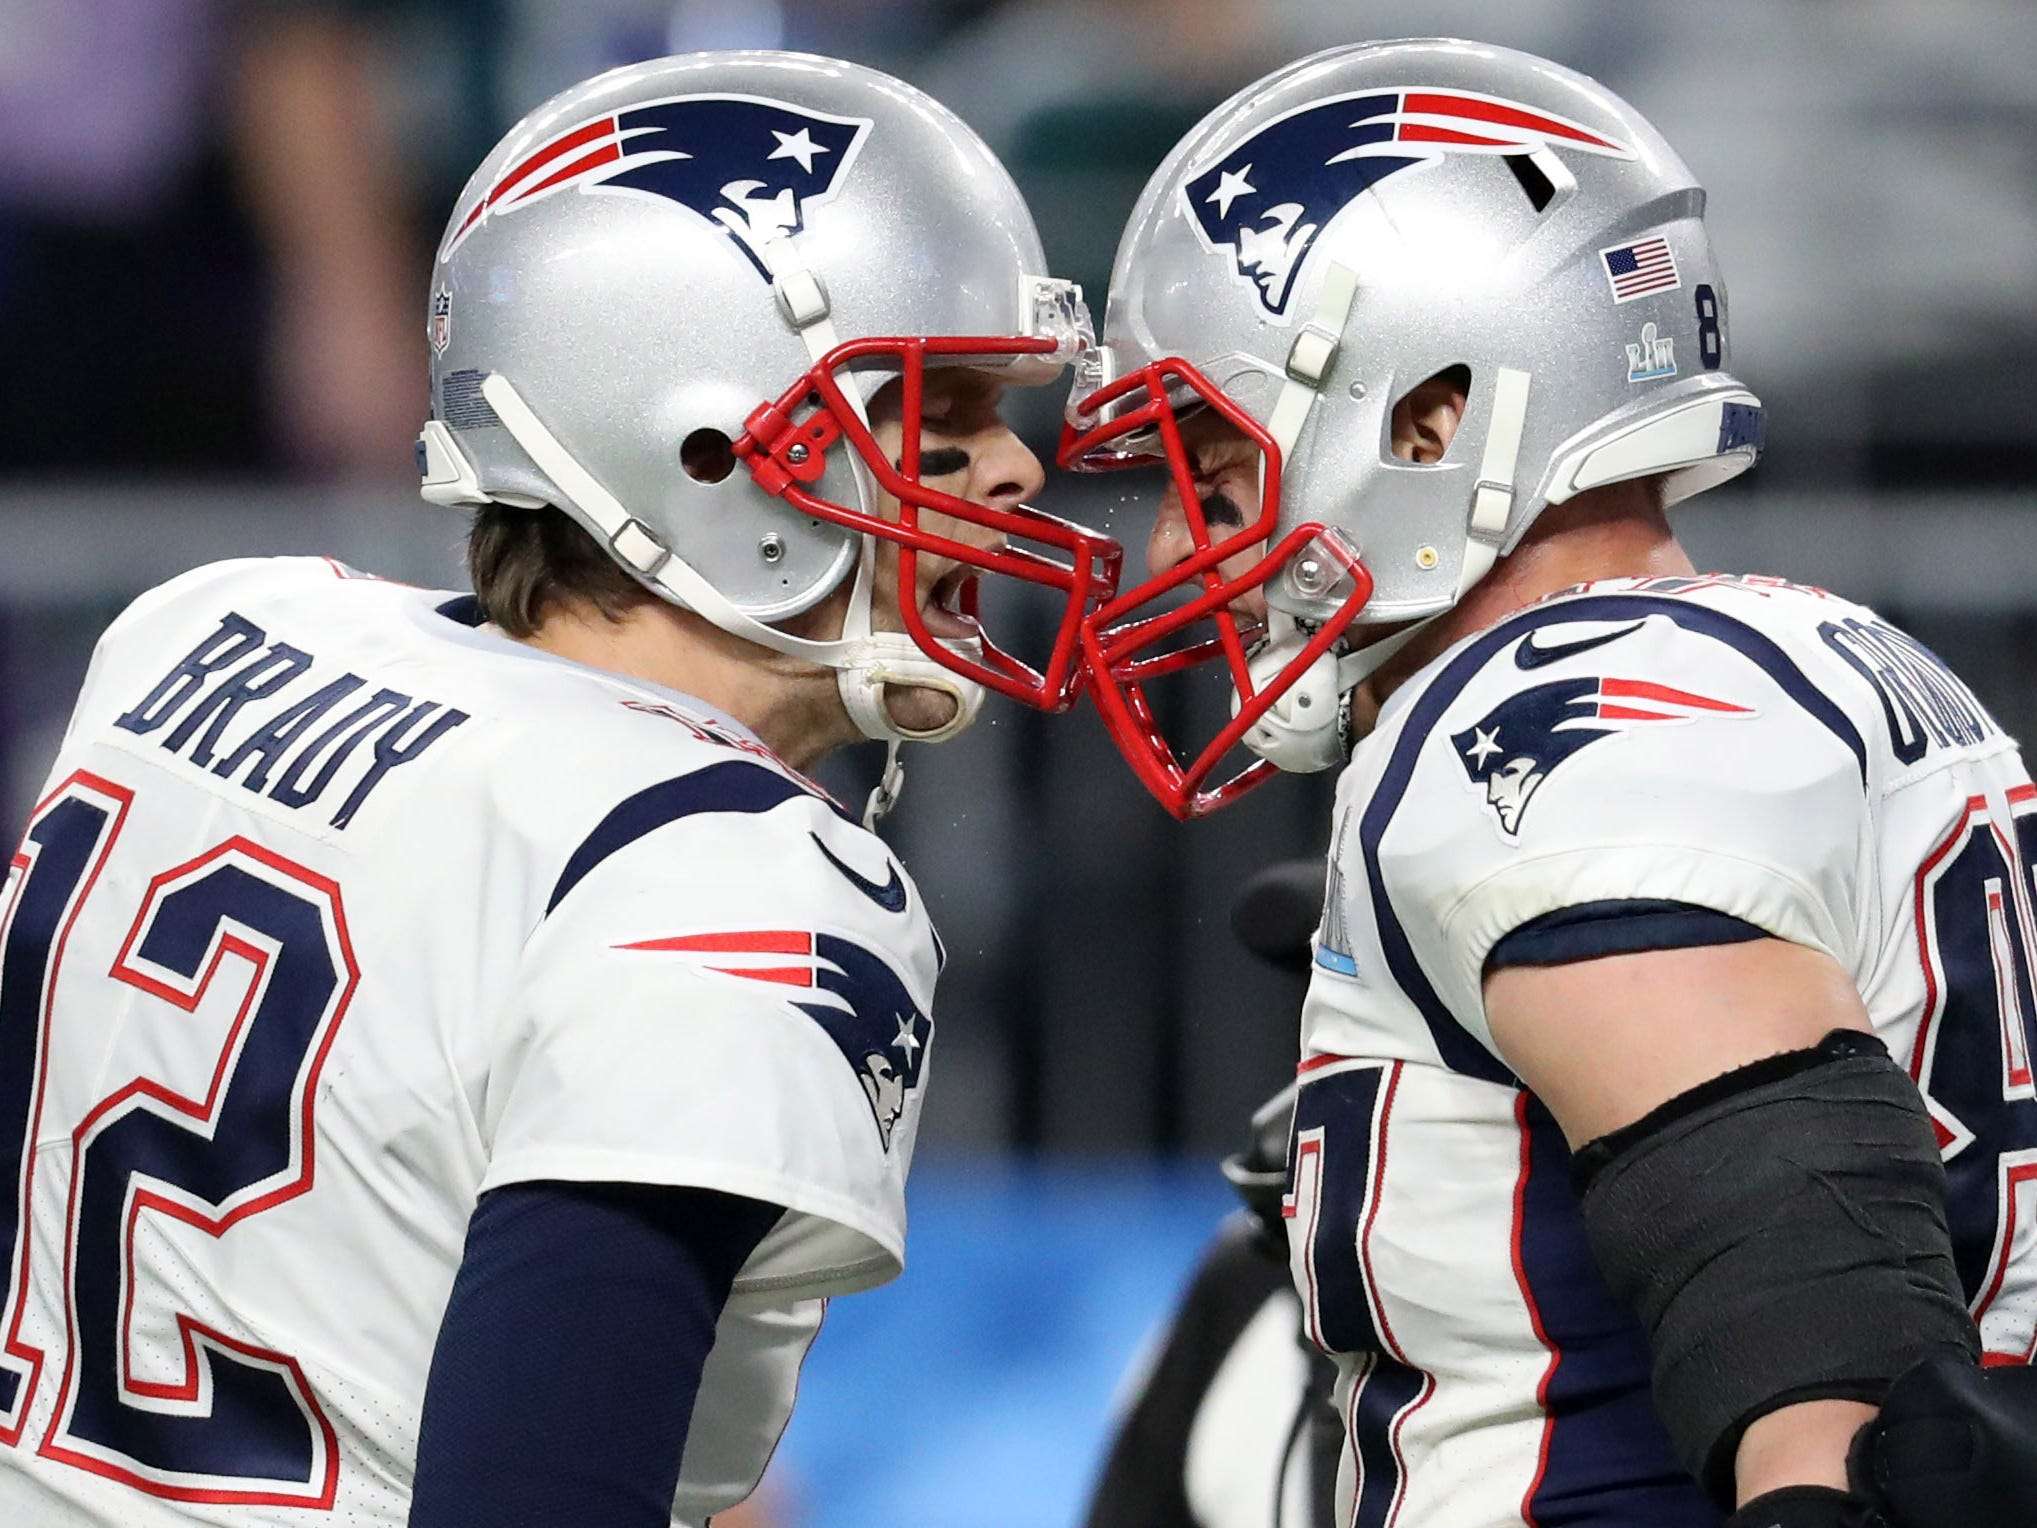 Tom Brady Welcomes New Buccaneers Teammate Rob Gronkowski Back To The Nfl In Instagram Post Business Insider India